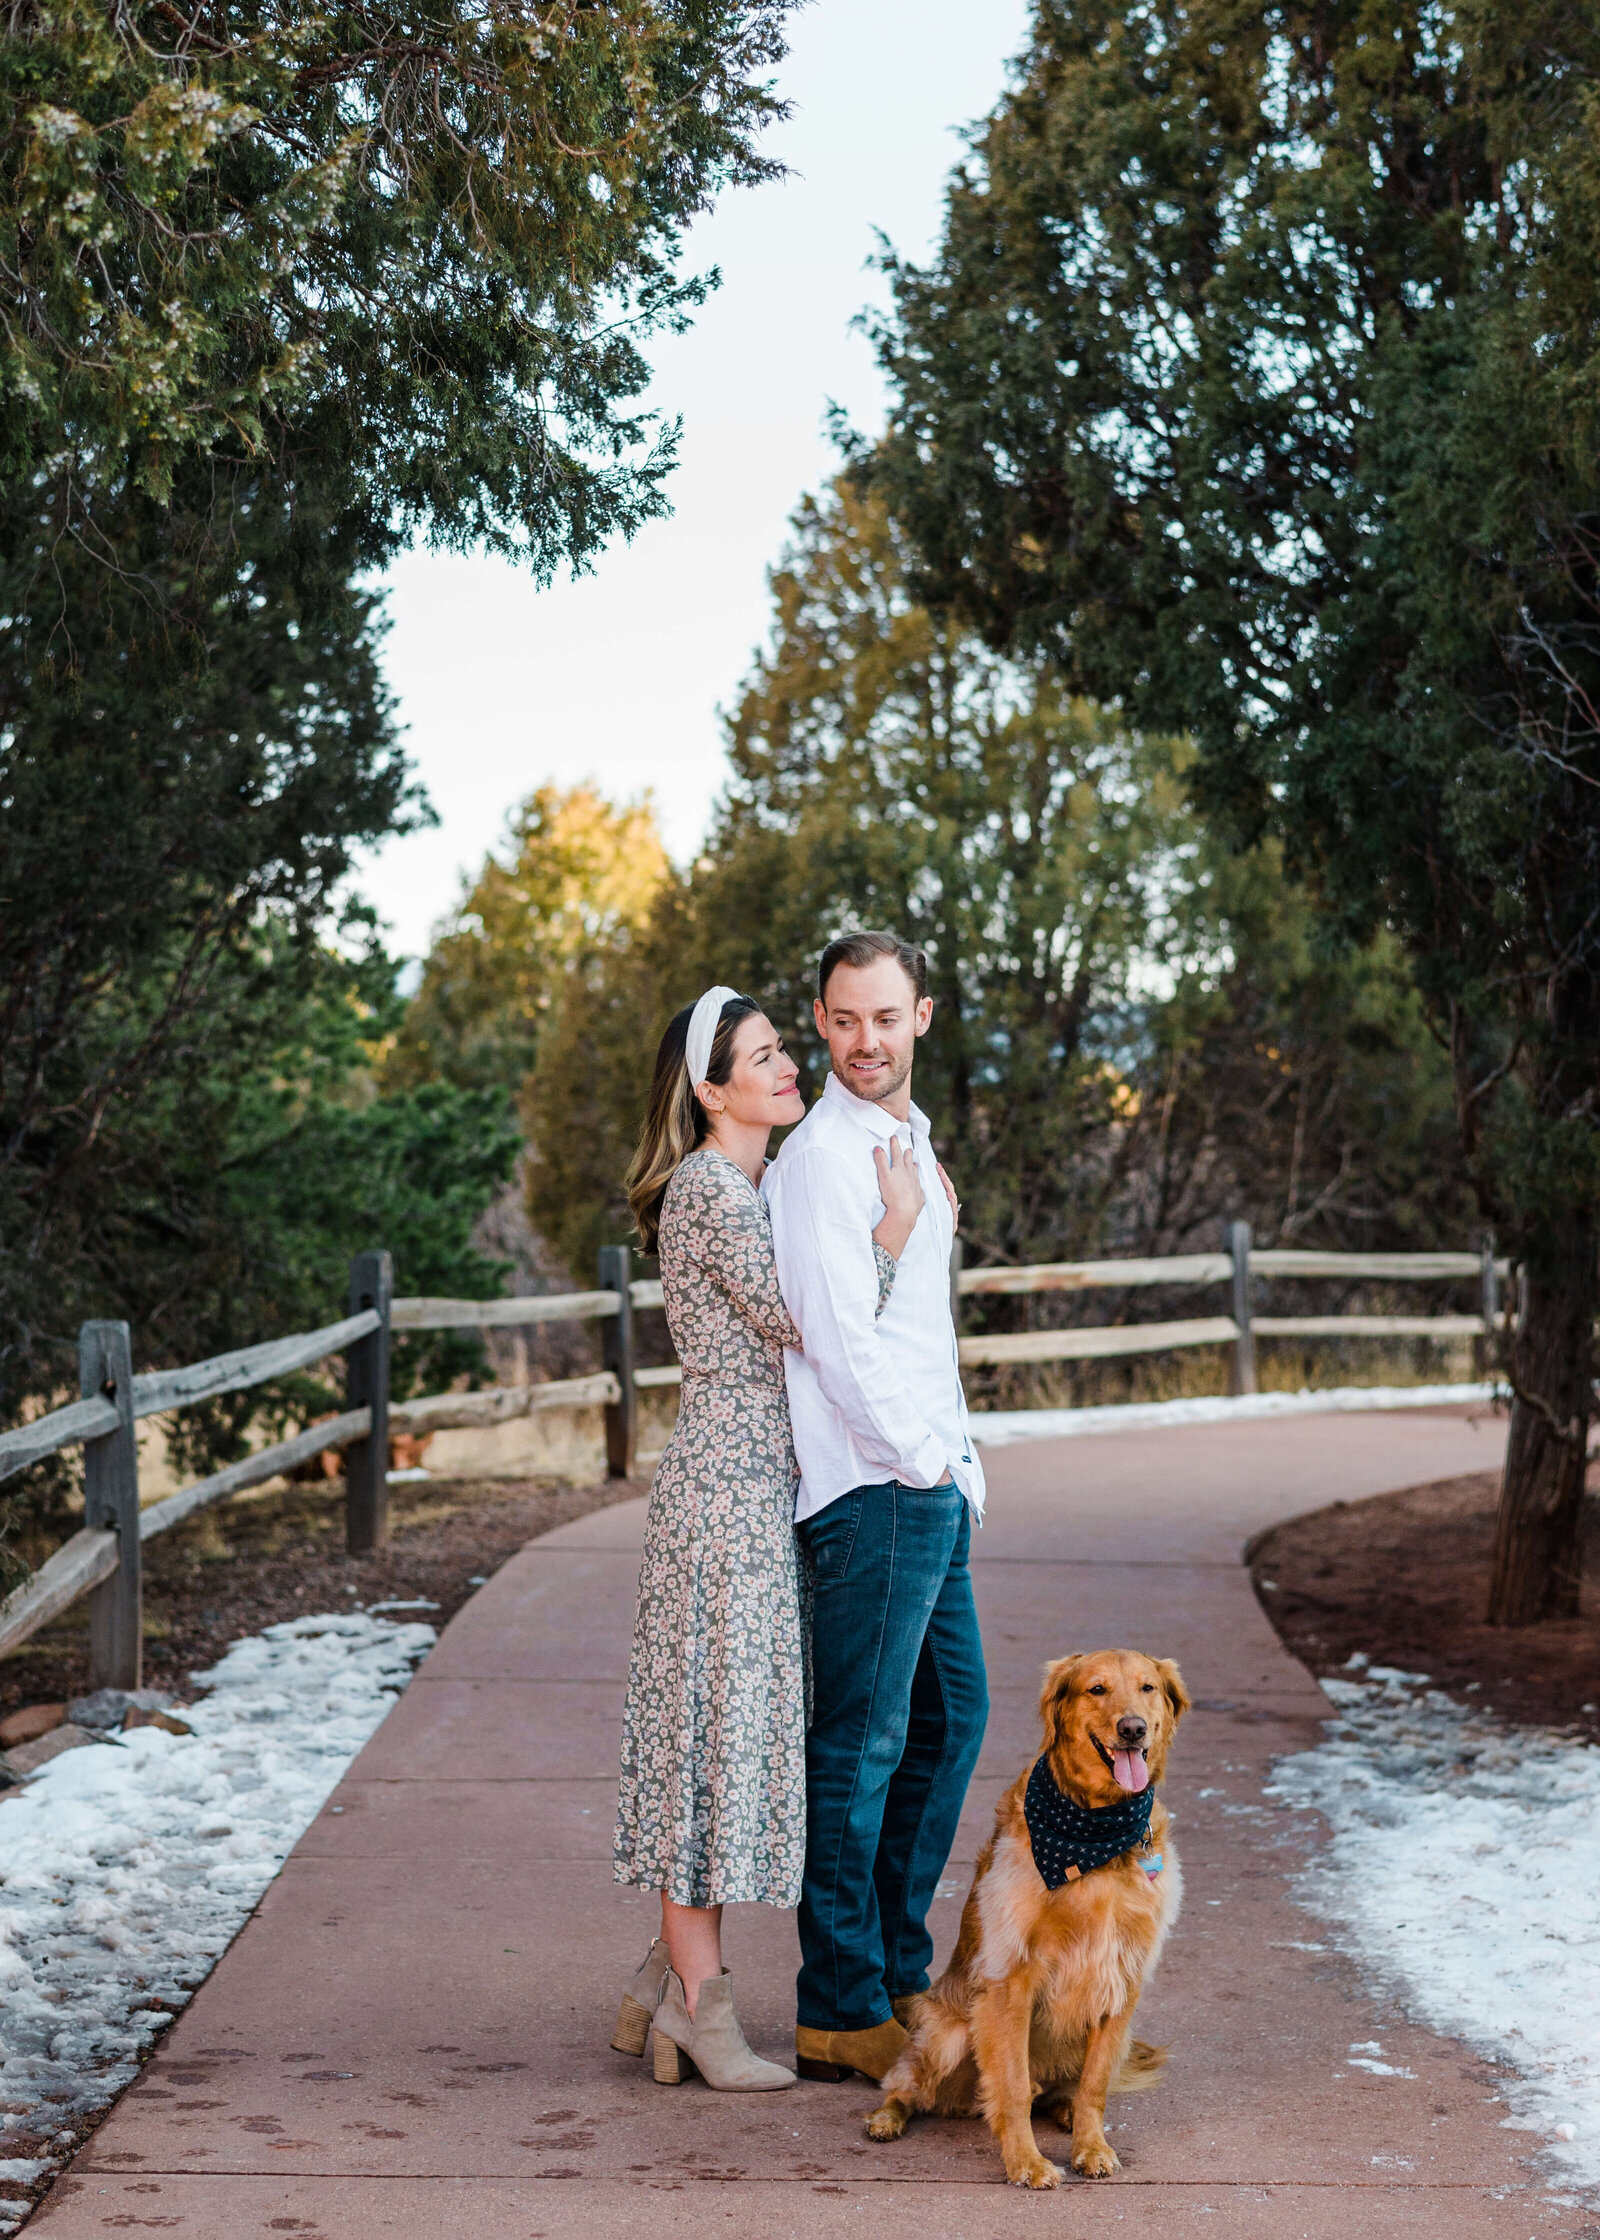 Man woman and dog at a park during engagement photo session